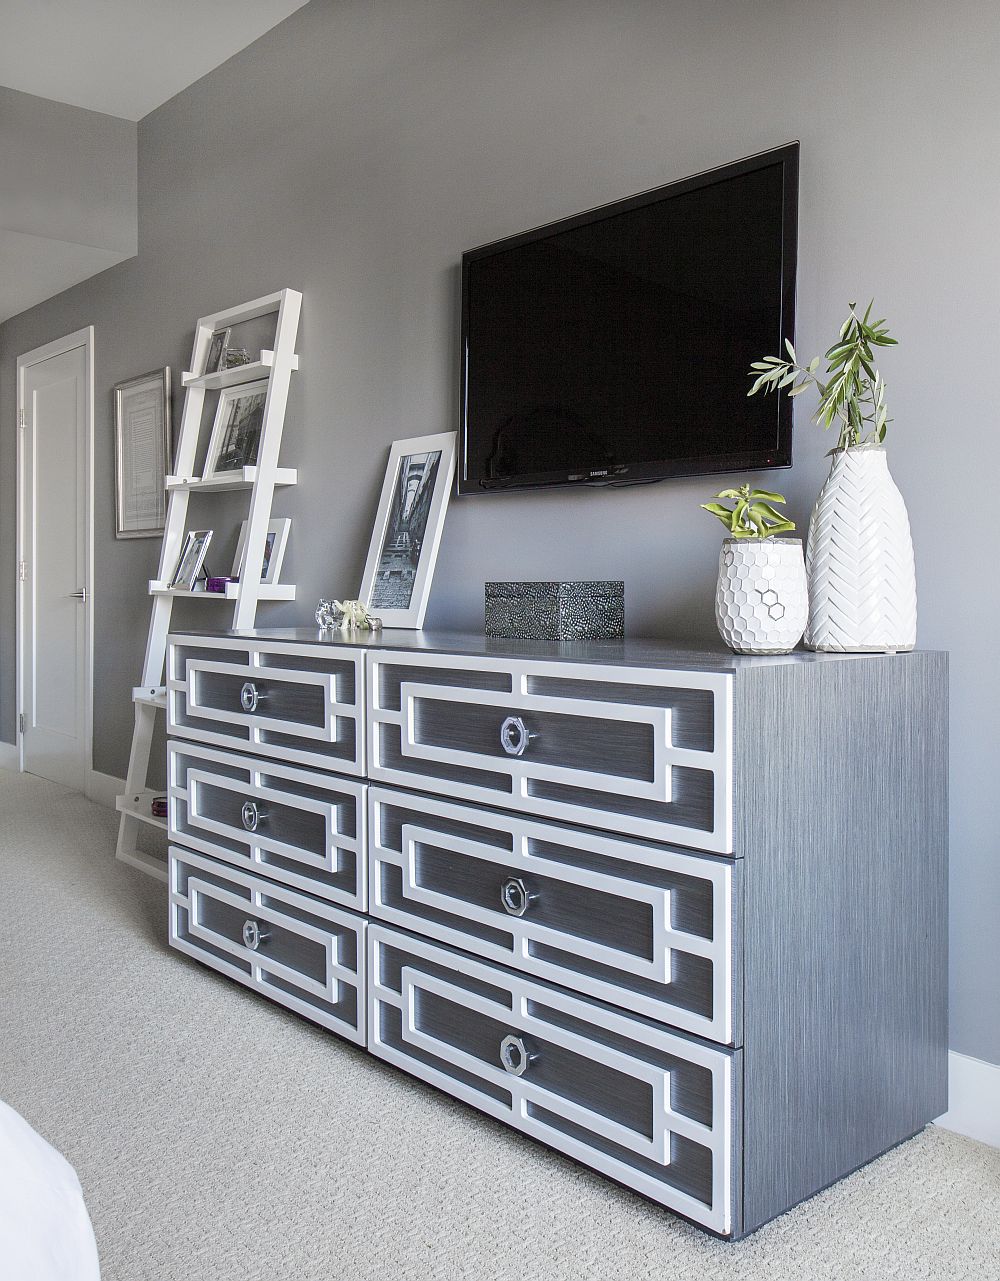 Gray brings chic sophistication to any setting it adorns